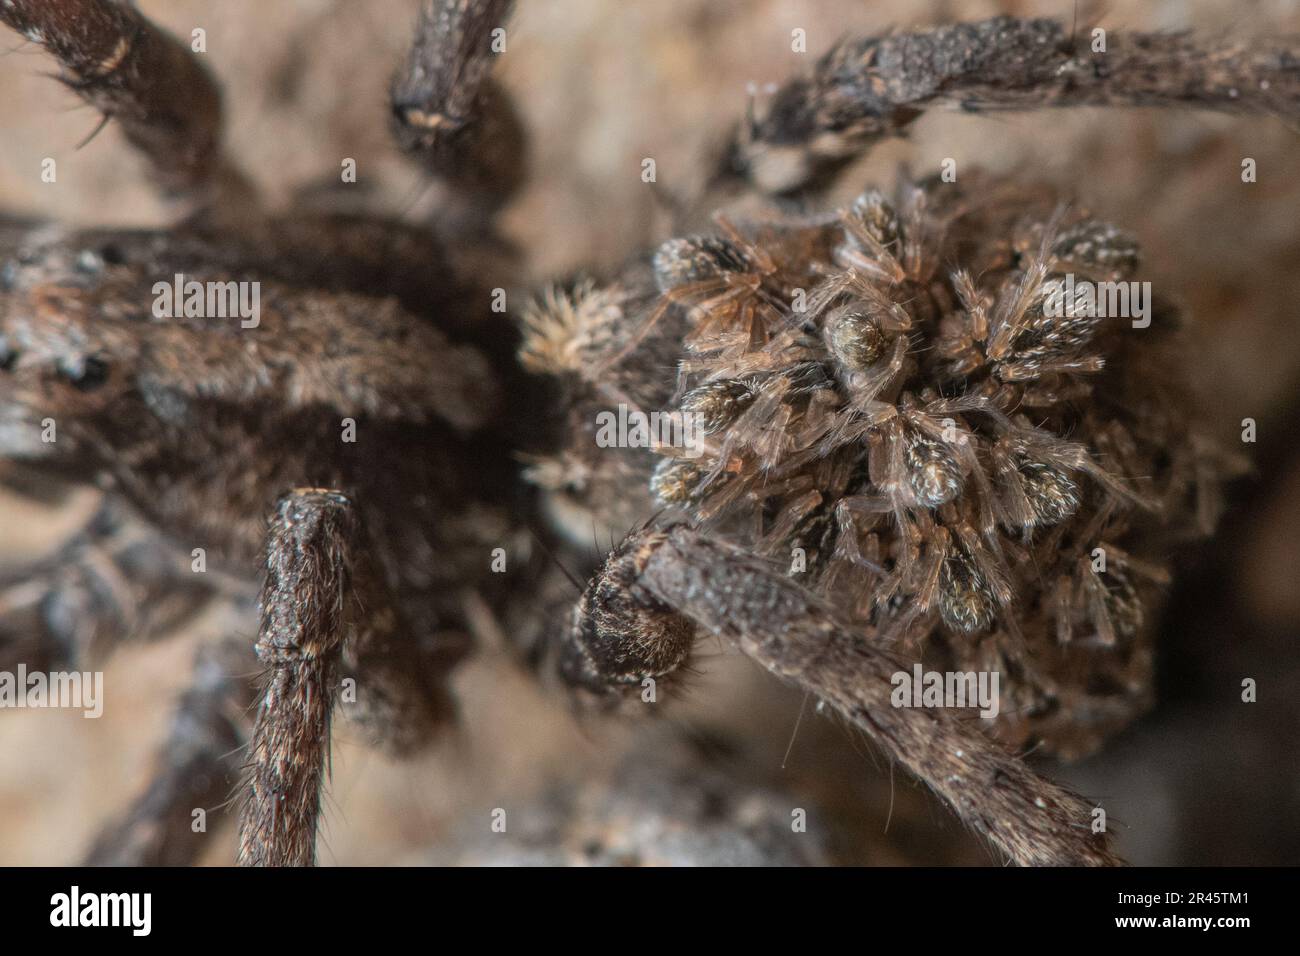 A wolf spider carries her offspring on her abdomen, the baby spiders hang on until they are old enough to go on their own. In Channel islands, CA. Stock Photo